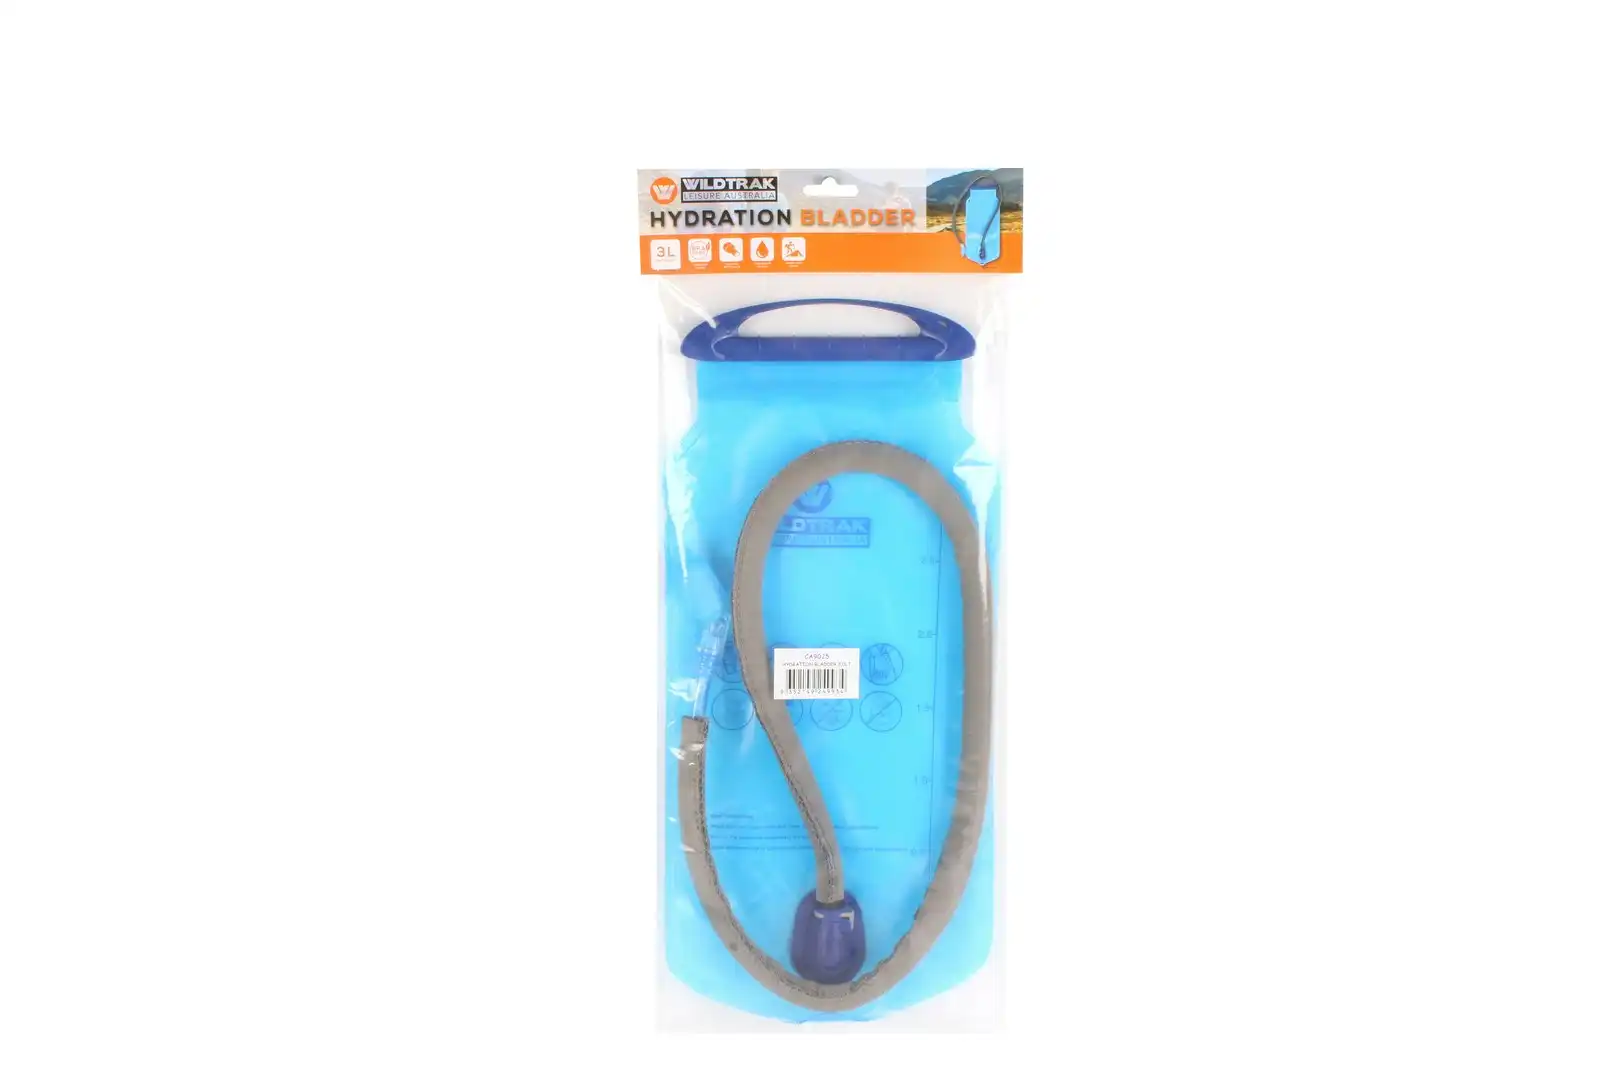 Wildtrak 3L Hydration Bladder Pack Outdoor Camping Water Drink Container Blue